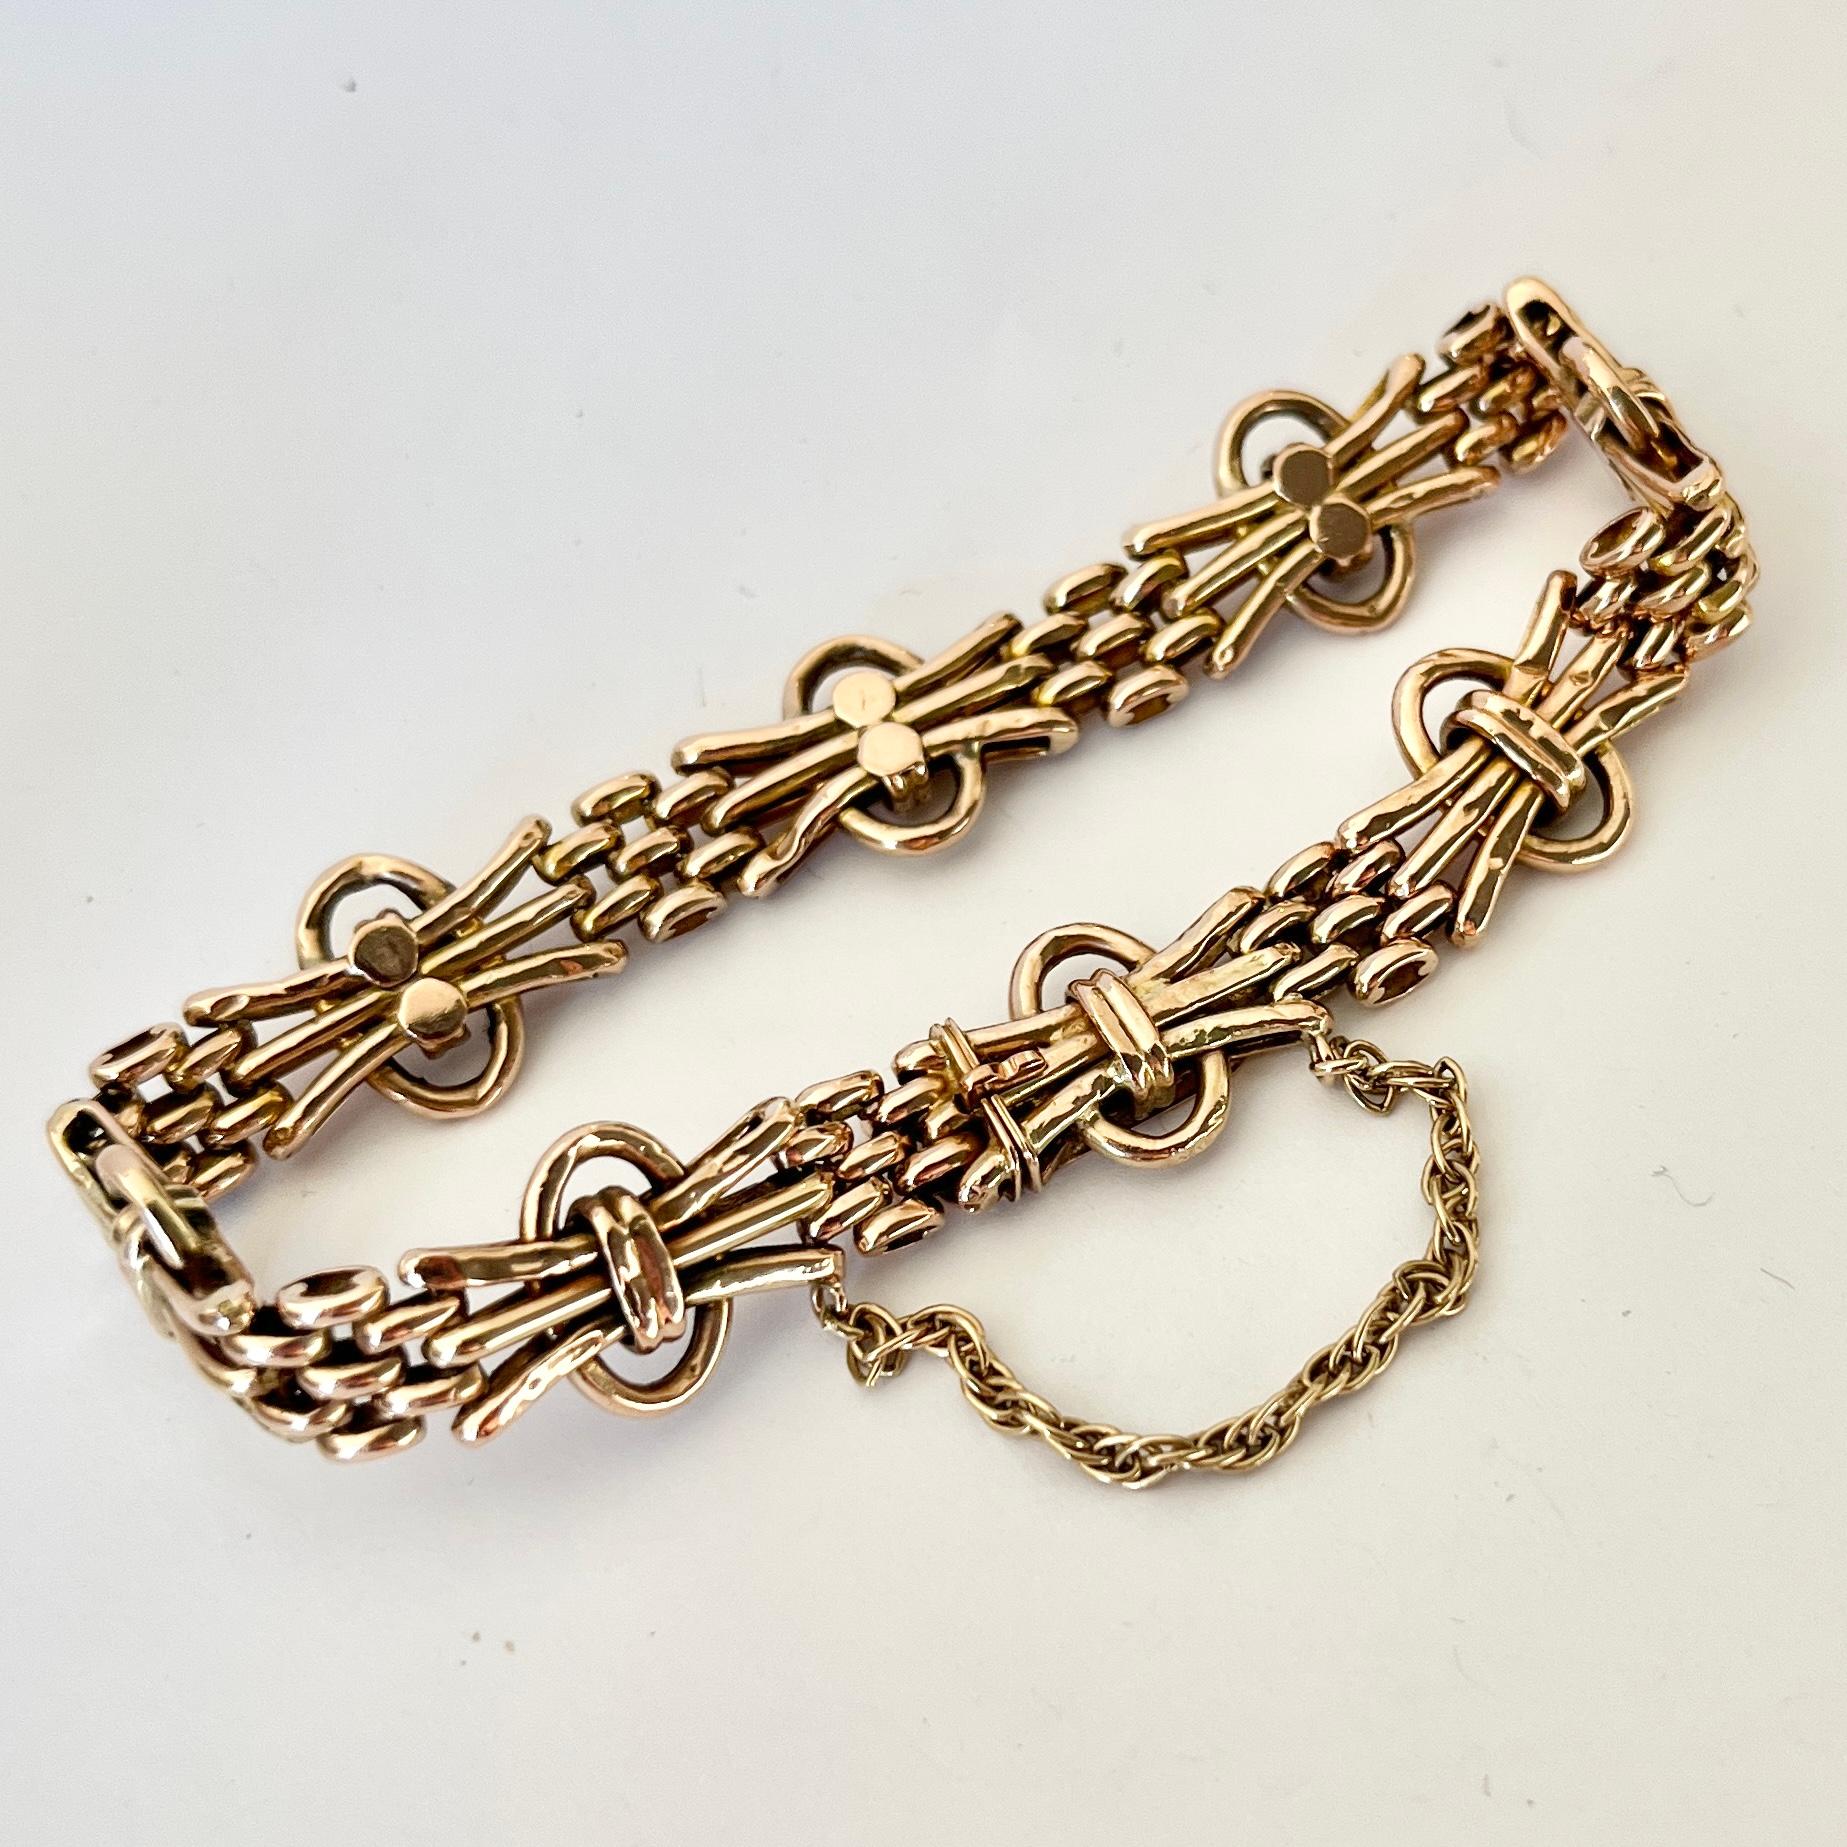 Antique 9ct Soft Tone Rose Gold Bracelet Chain In Good Condition For Sale In Chipping Campden, GB